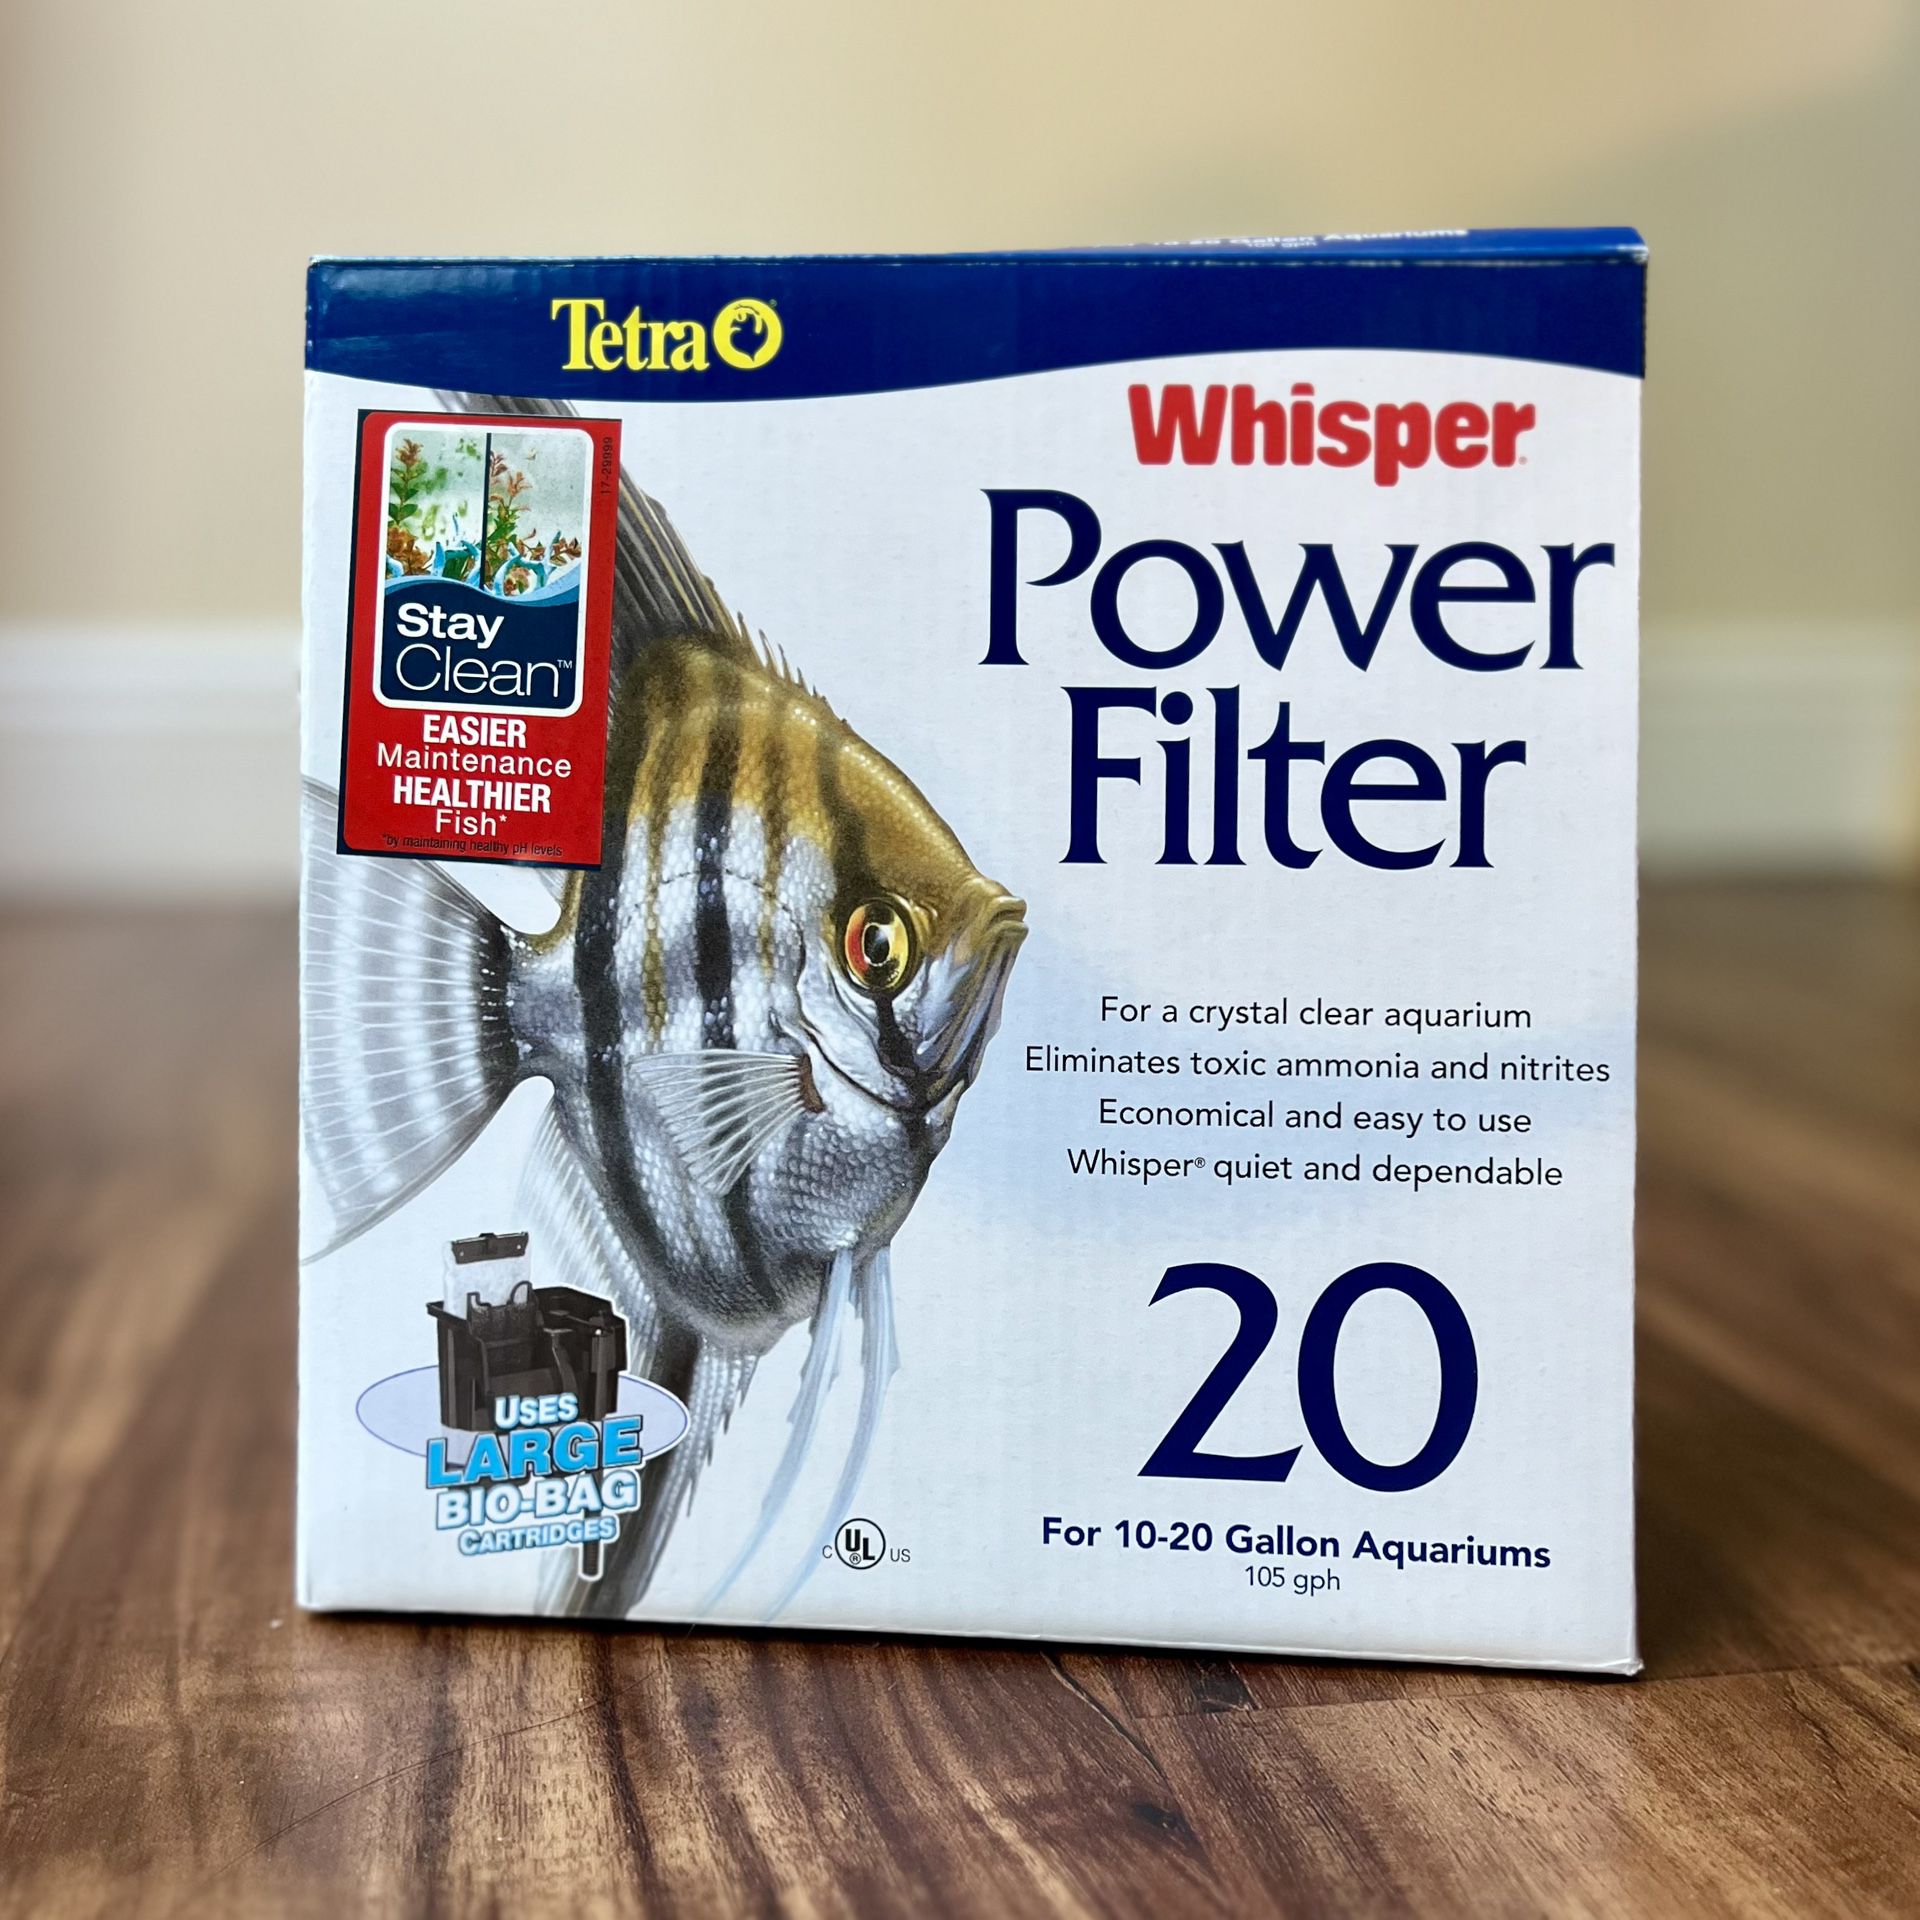 Tetra Whisper Power Filter for Aquariums, 3 Filters in 1, 20 Gallons 